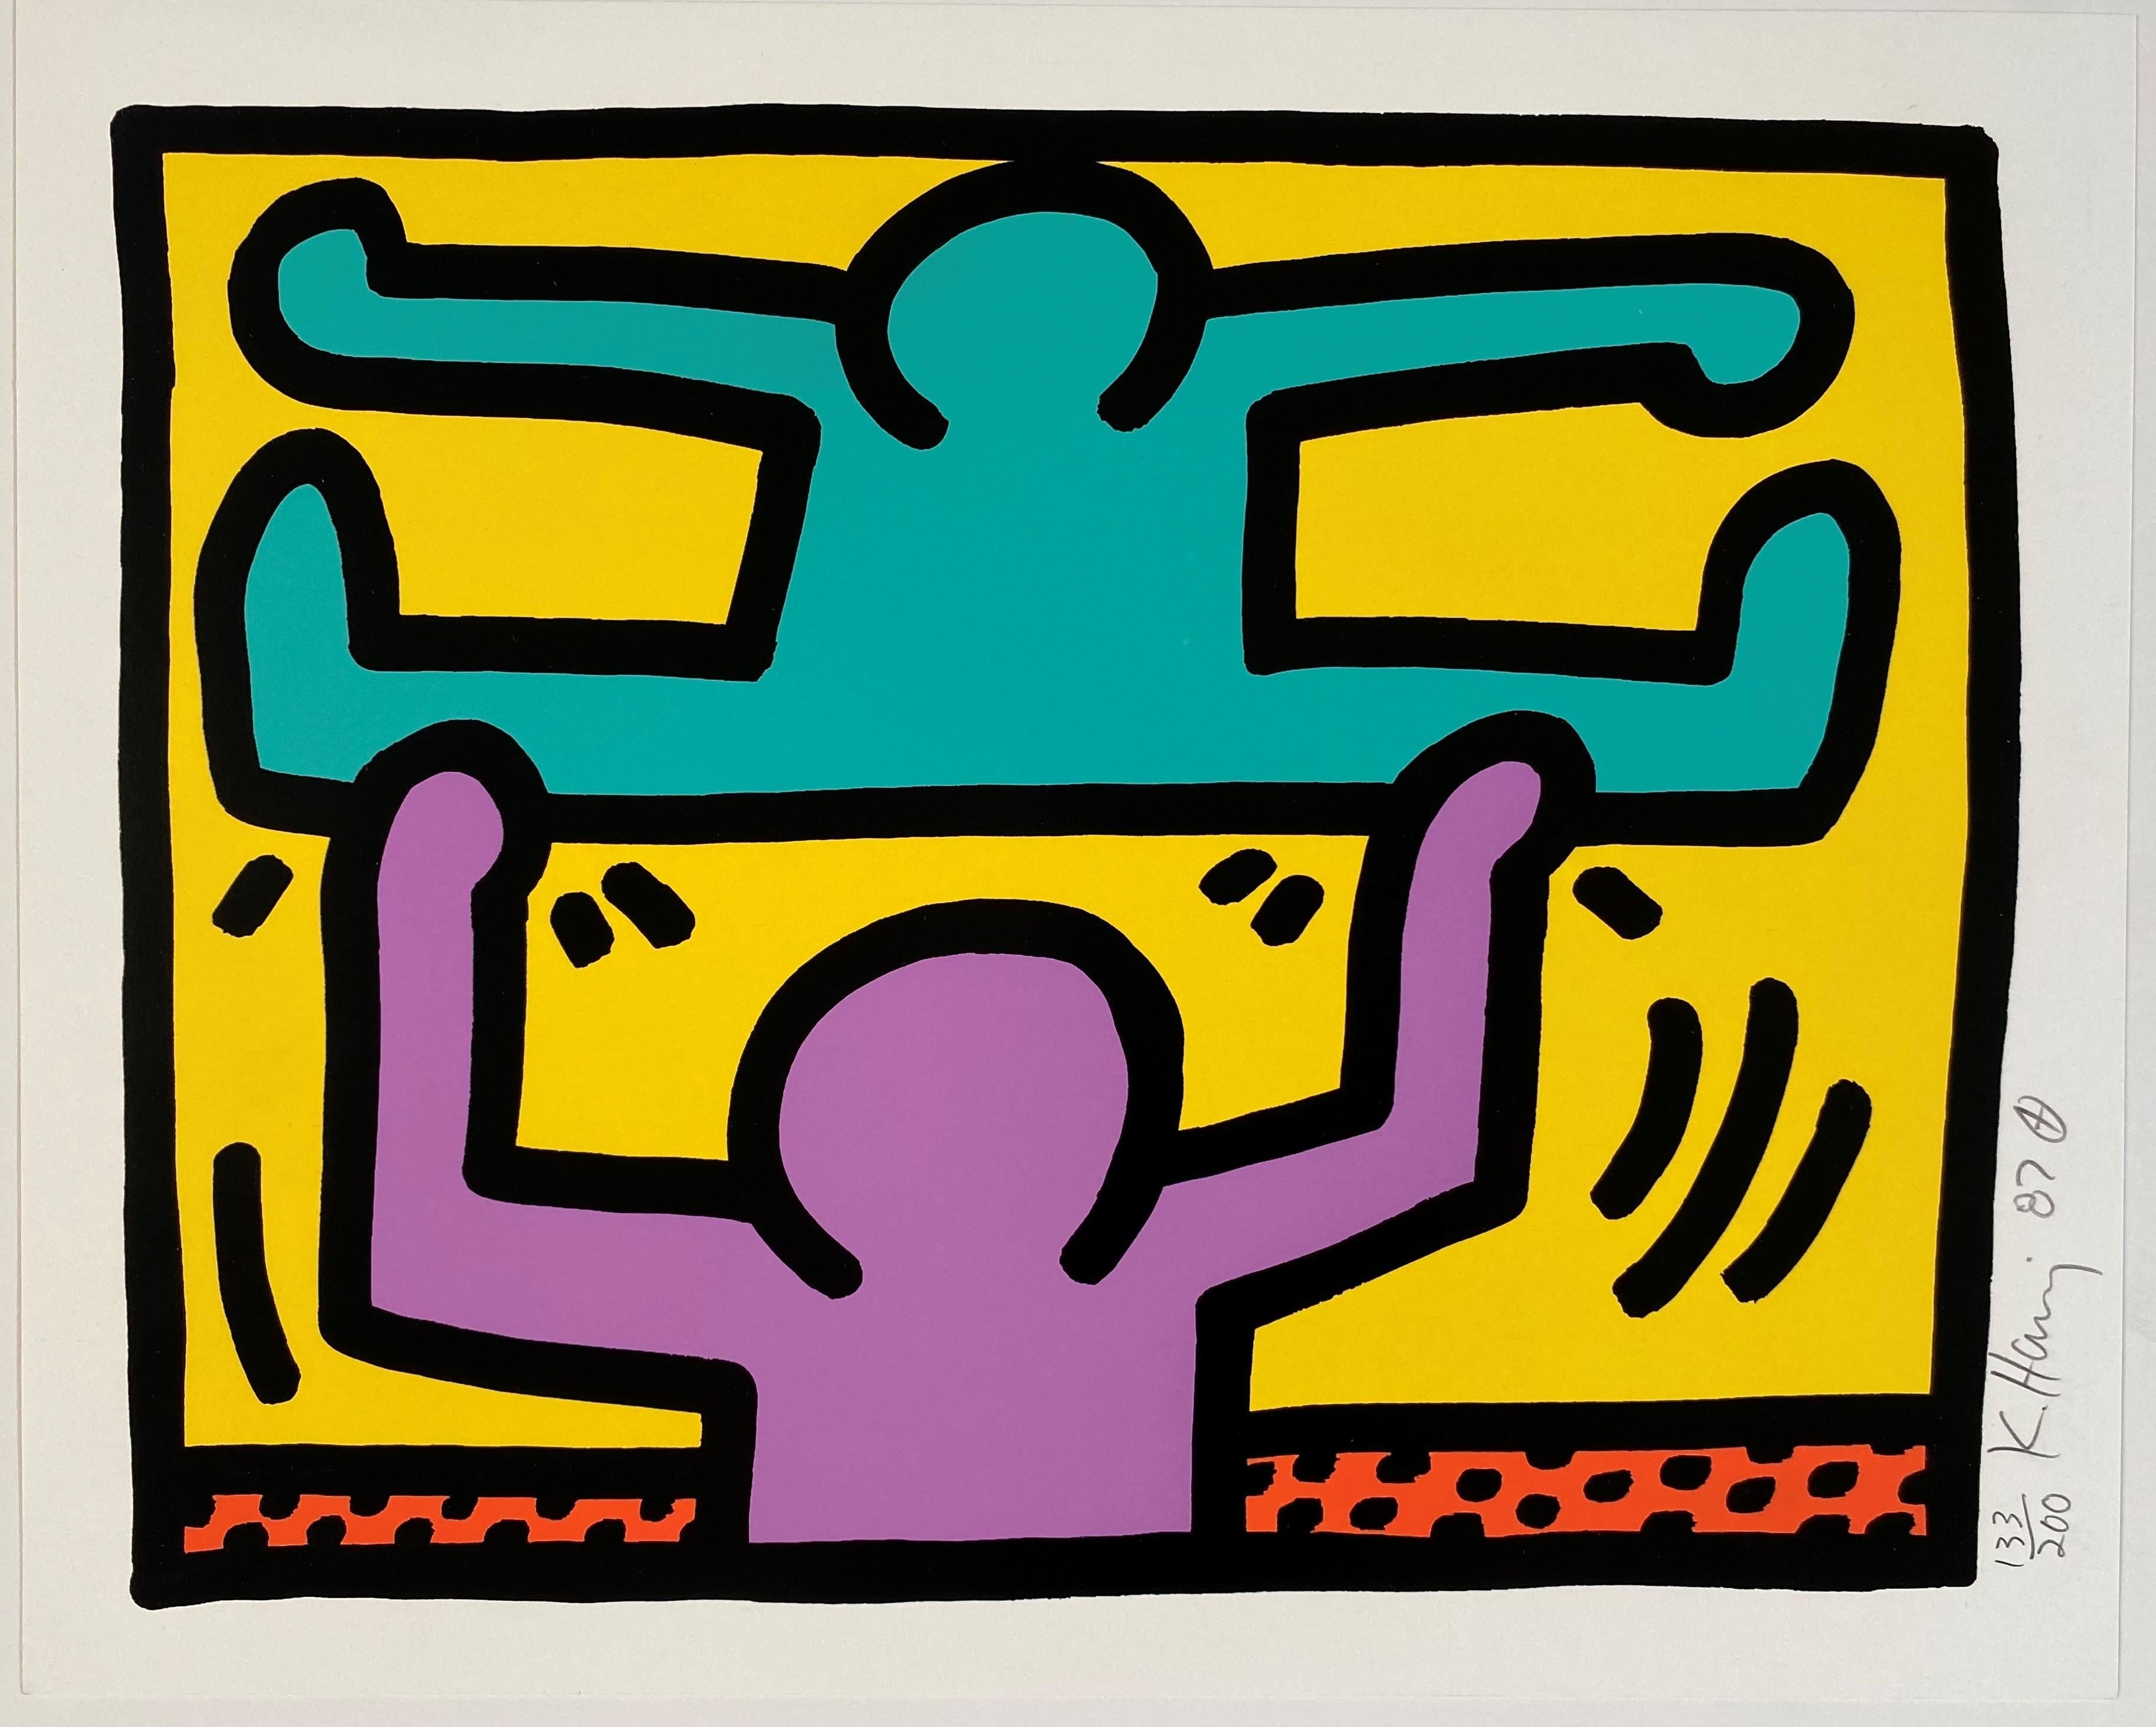 Pop Shop I (4) - Print by Keith Haring